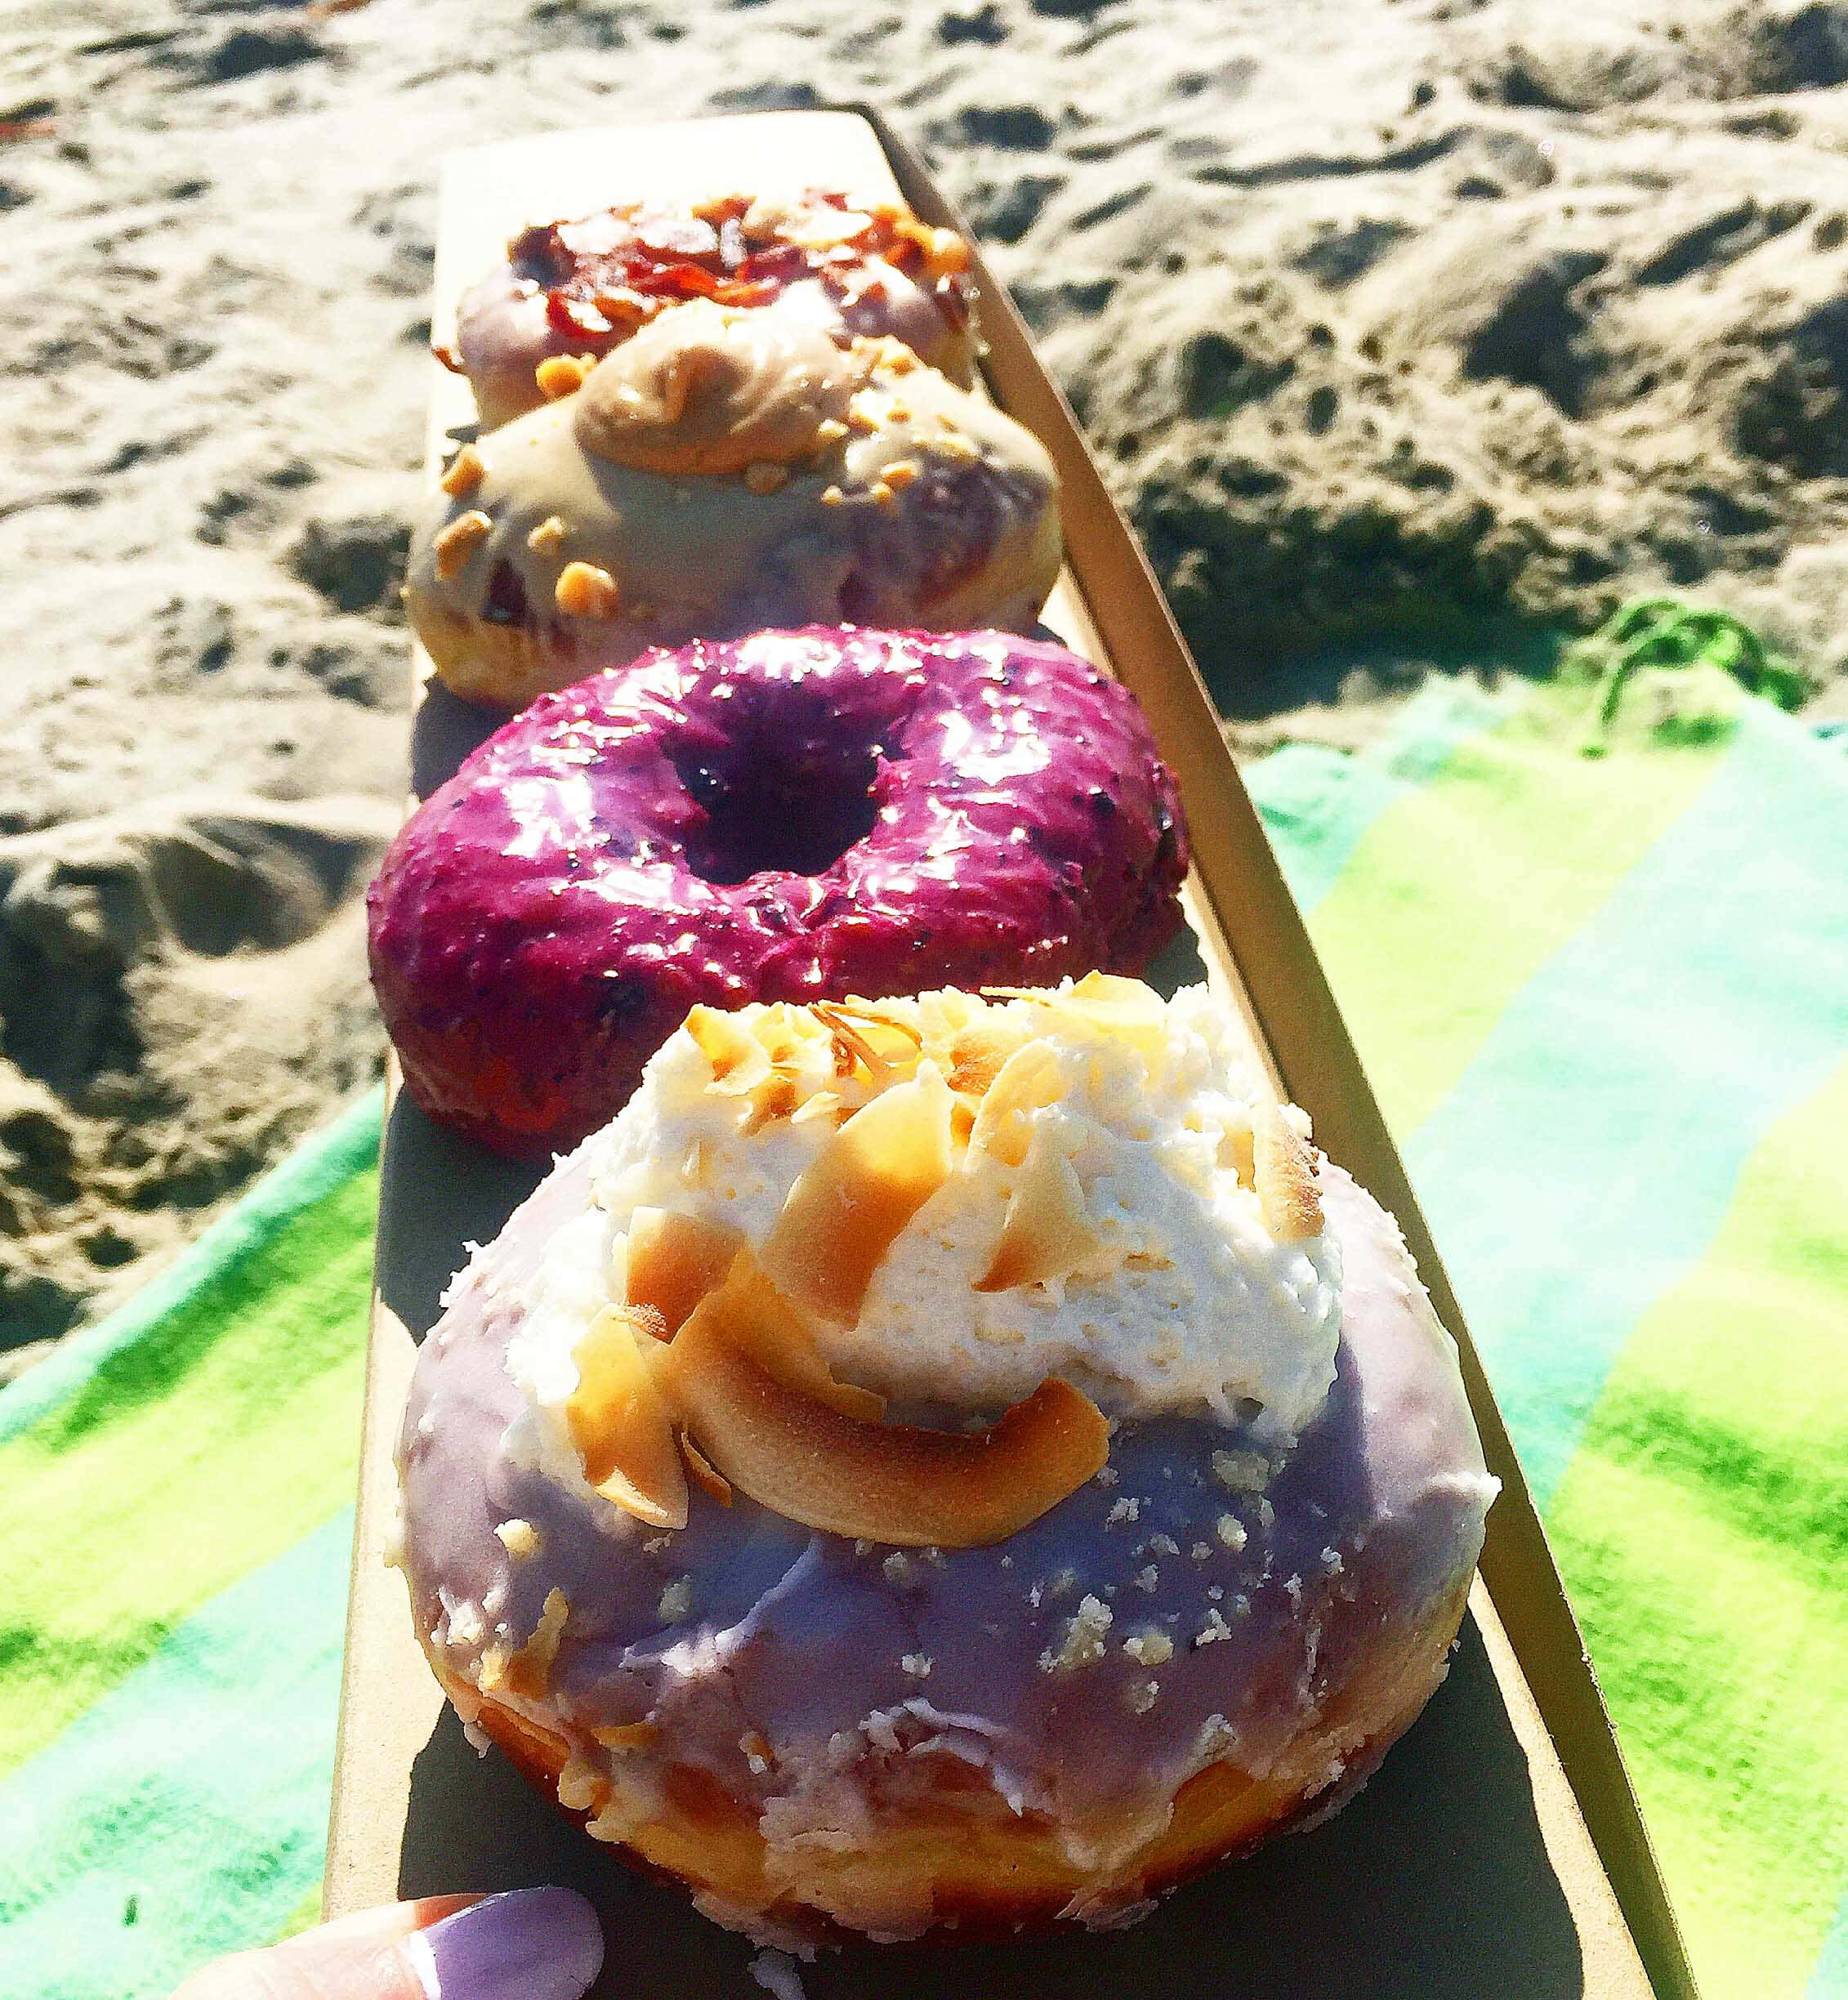 Best Places to Eat in Orange County. The most popular restaurants, food, and dessert in California. www.modernhoney.com. Sidecar doughnuts in California.